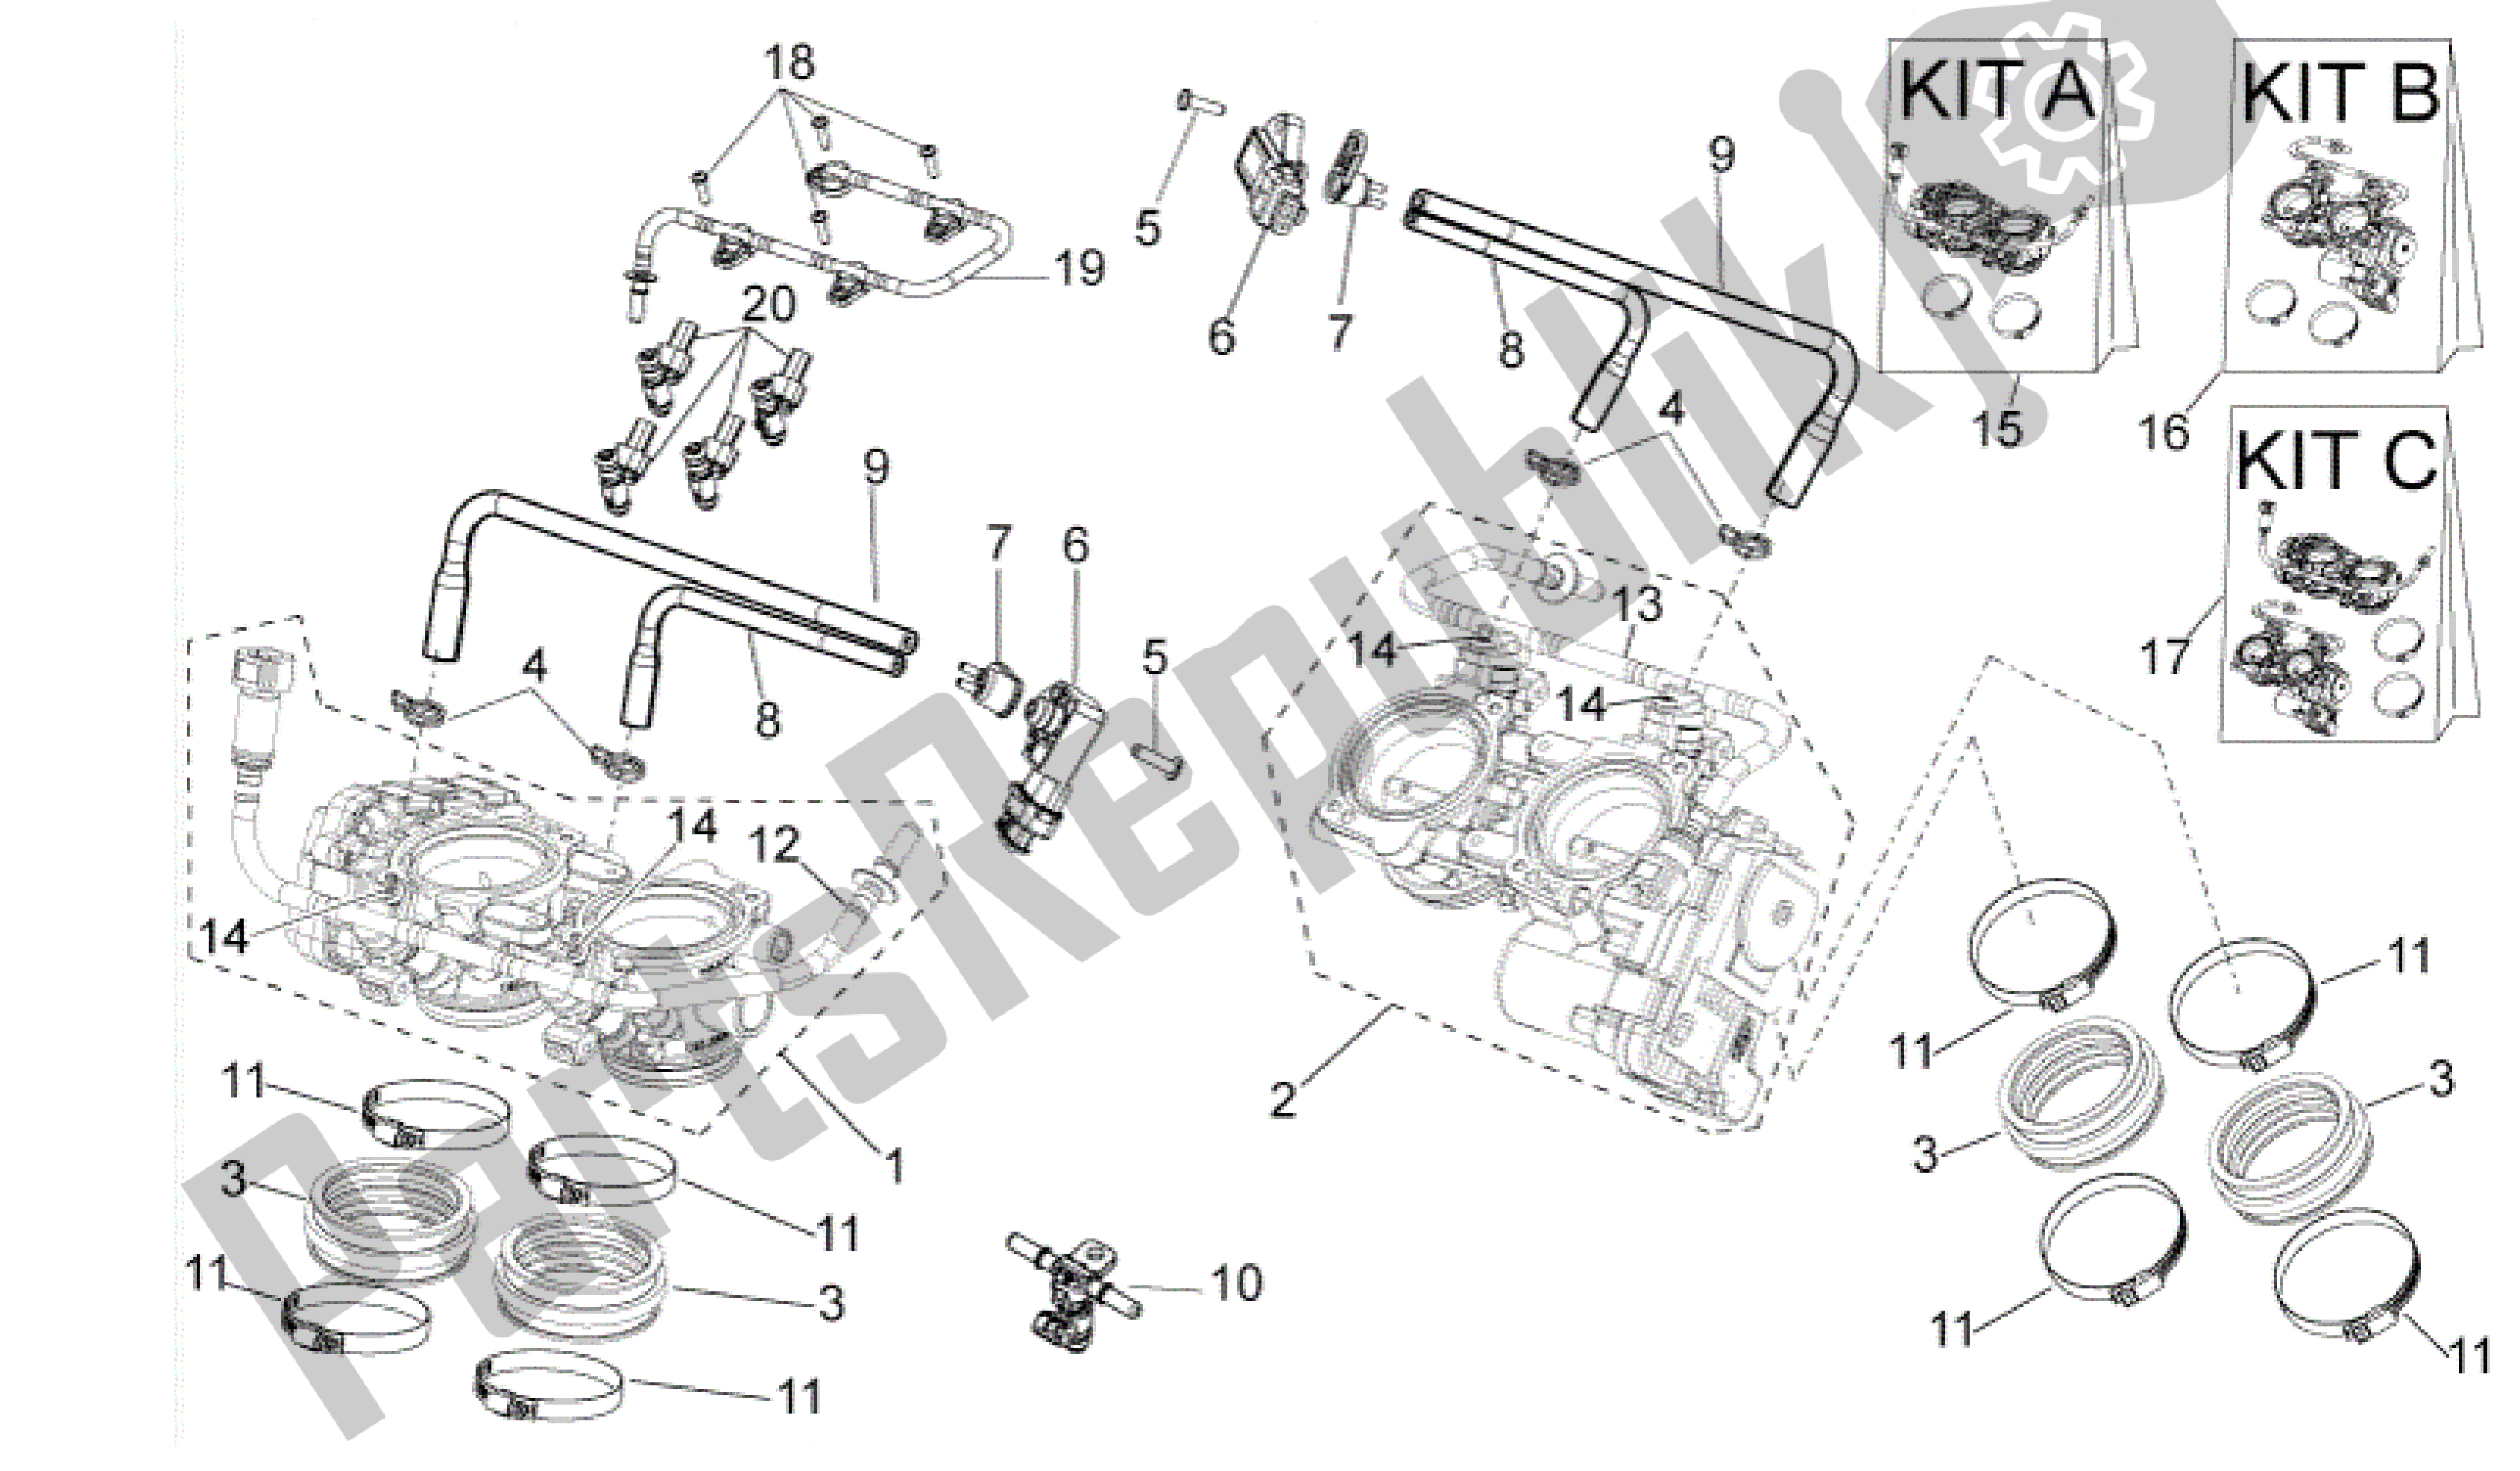 All parts for the Throttle Body of the Aprilia RSV4 Aprc R 3982 1000 2011 - 2012